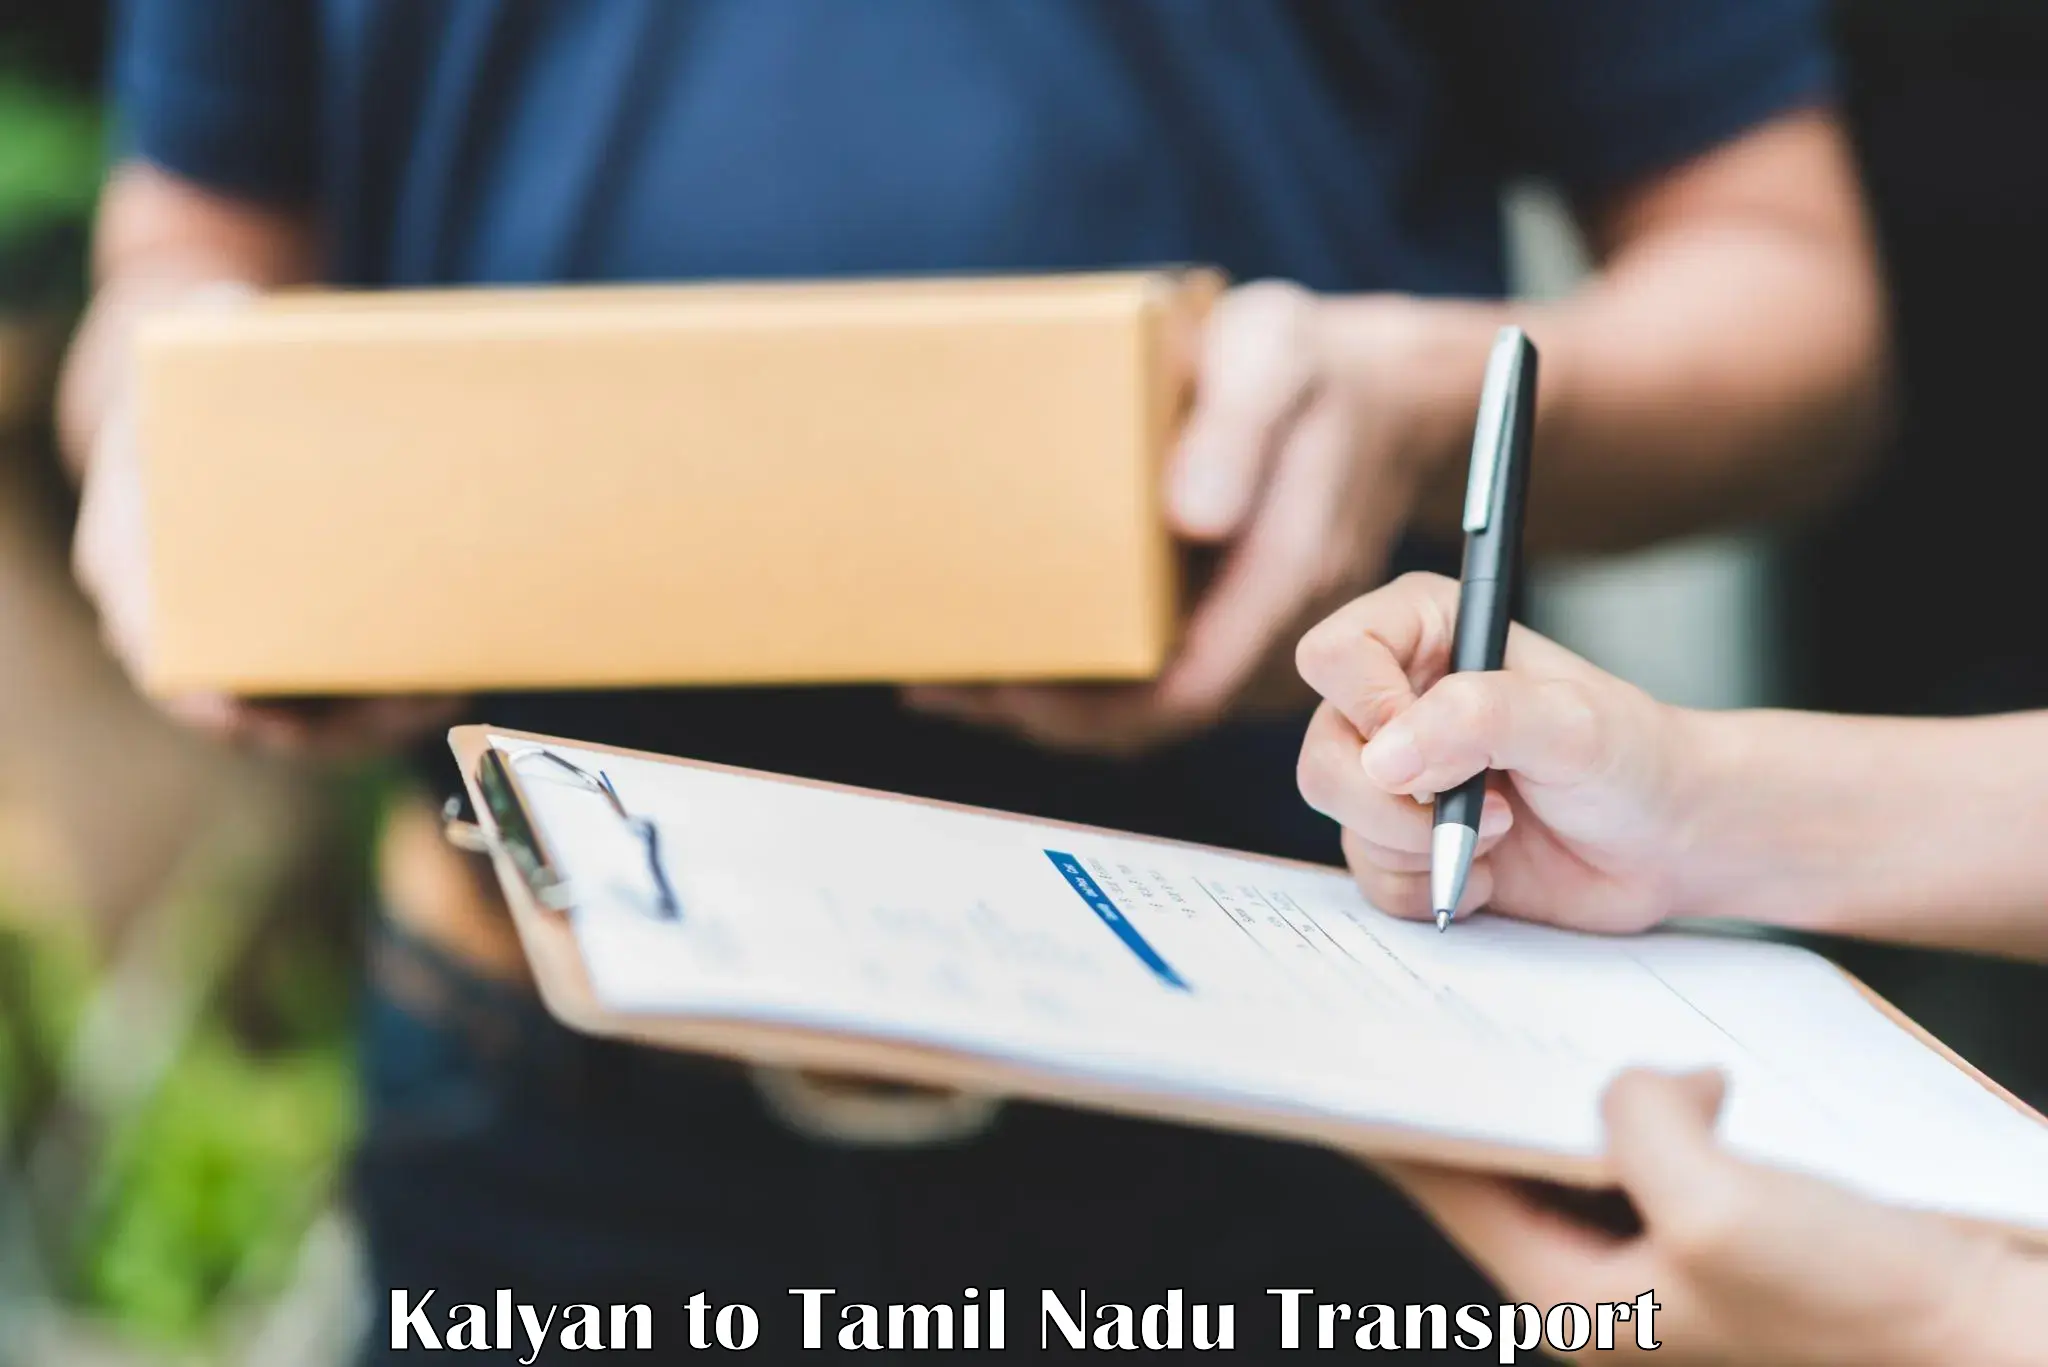 Truck transport companies in India Kalyan to Vellore